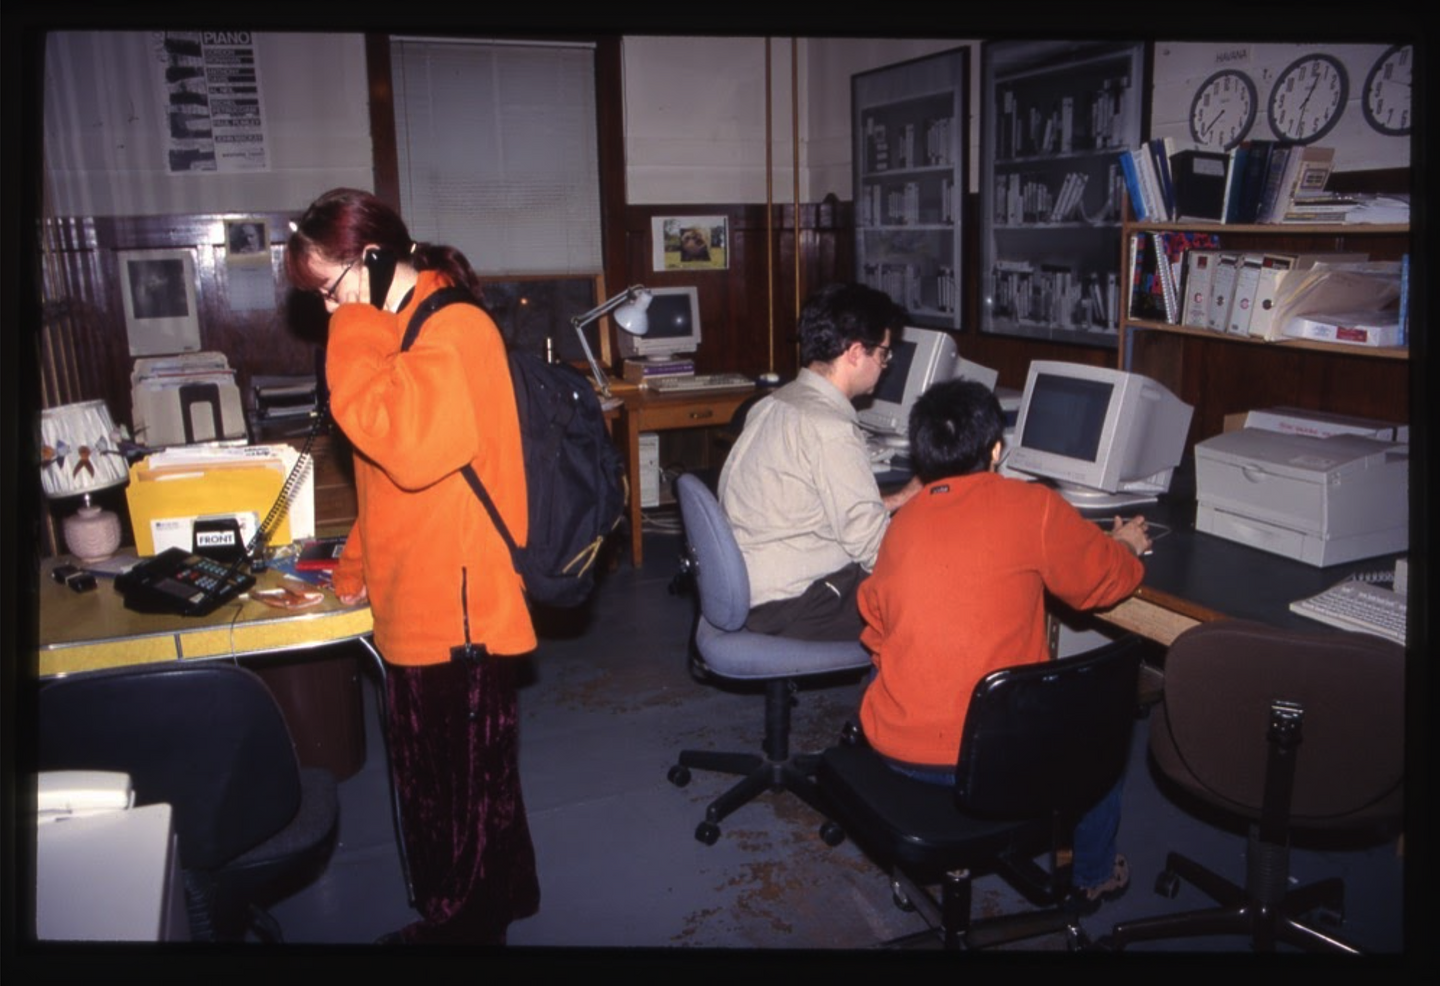 A colour photograph of Western Front staff in the office. Anna Stauffer stands next to a table holding a phone to her ear, and Jonathan Middleton and Eileen Kage are seated at a desk, looking at a computer.